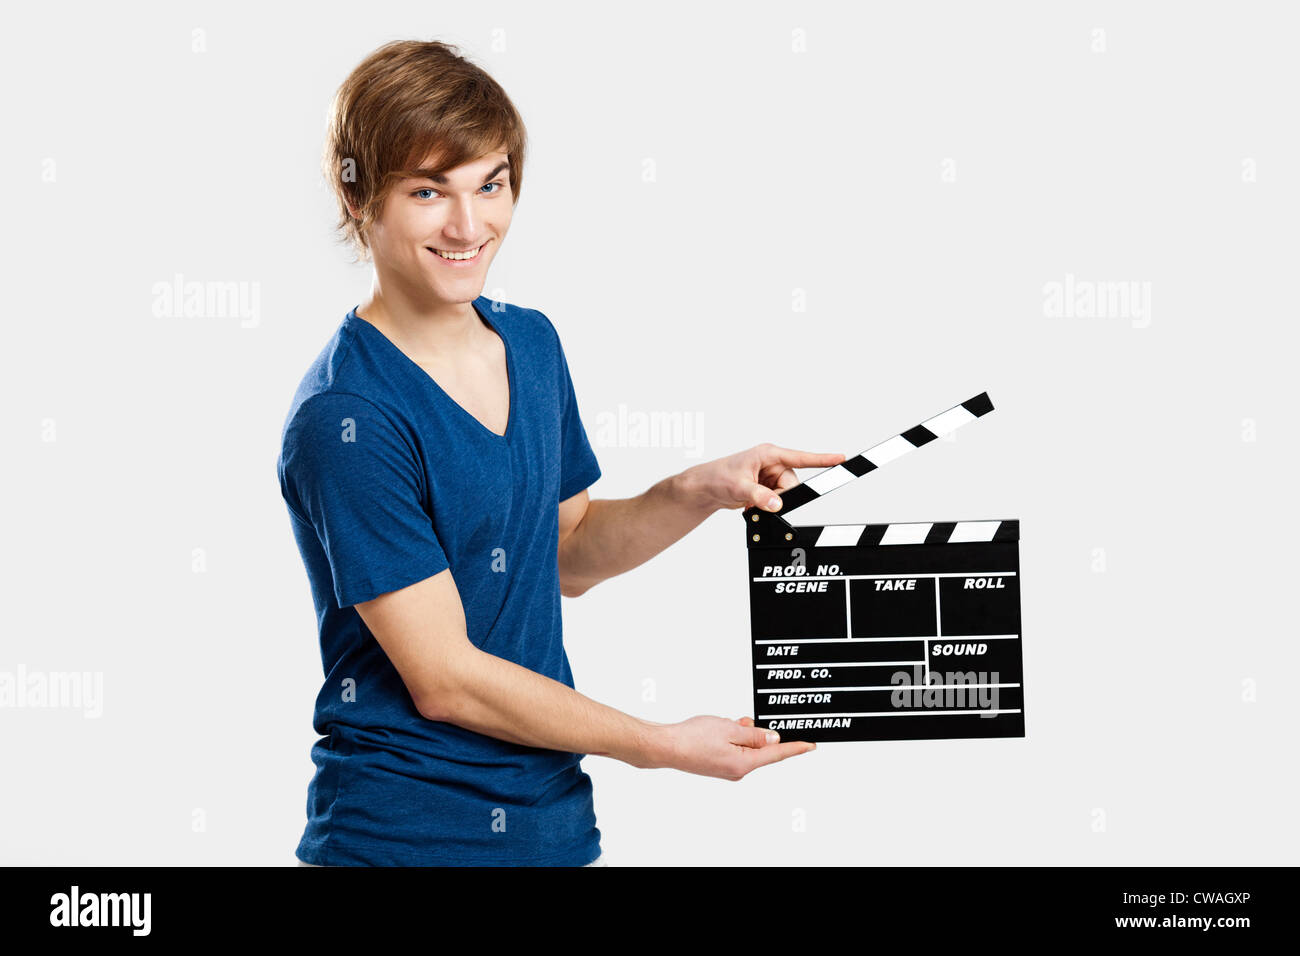 Casual young man holding a clapboard, over a gray background Stock Photo